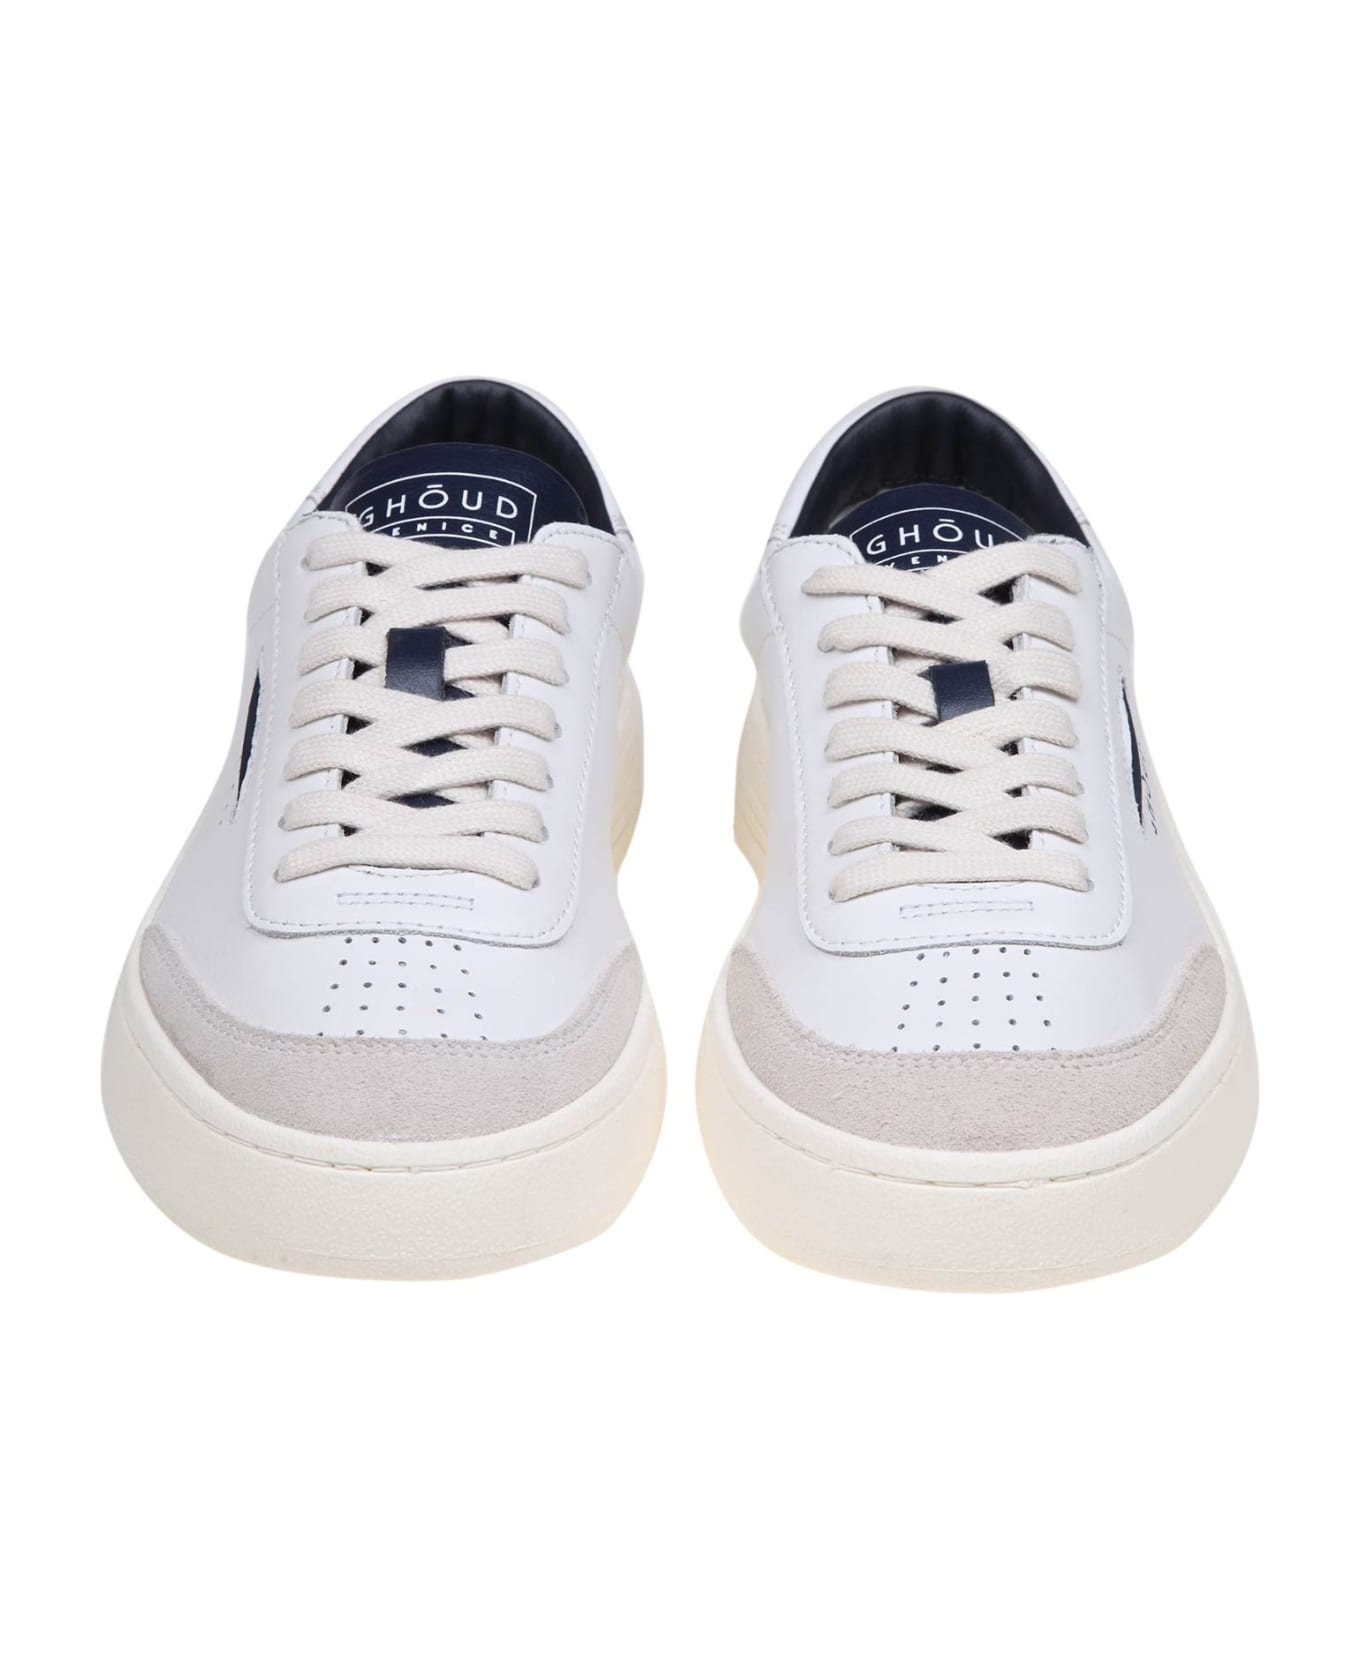 GHOUD Lido Low Sneakers In White/blue Leather And Suede - LEAT/SUEDE WHT/BLUE スニーカー